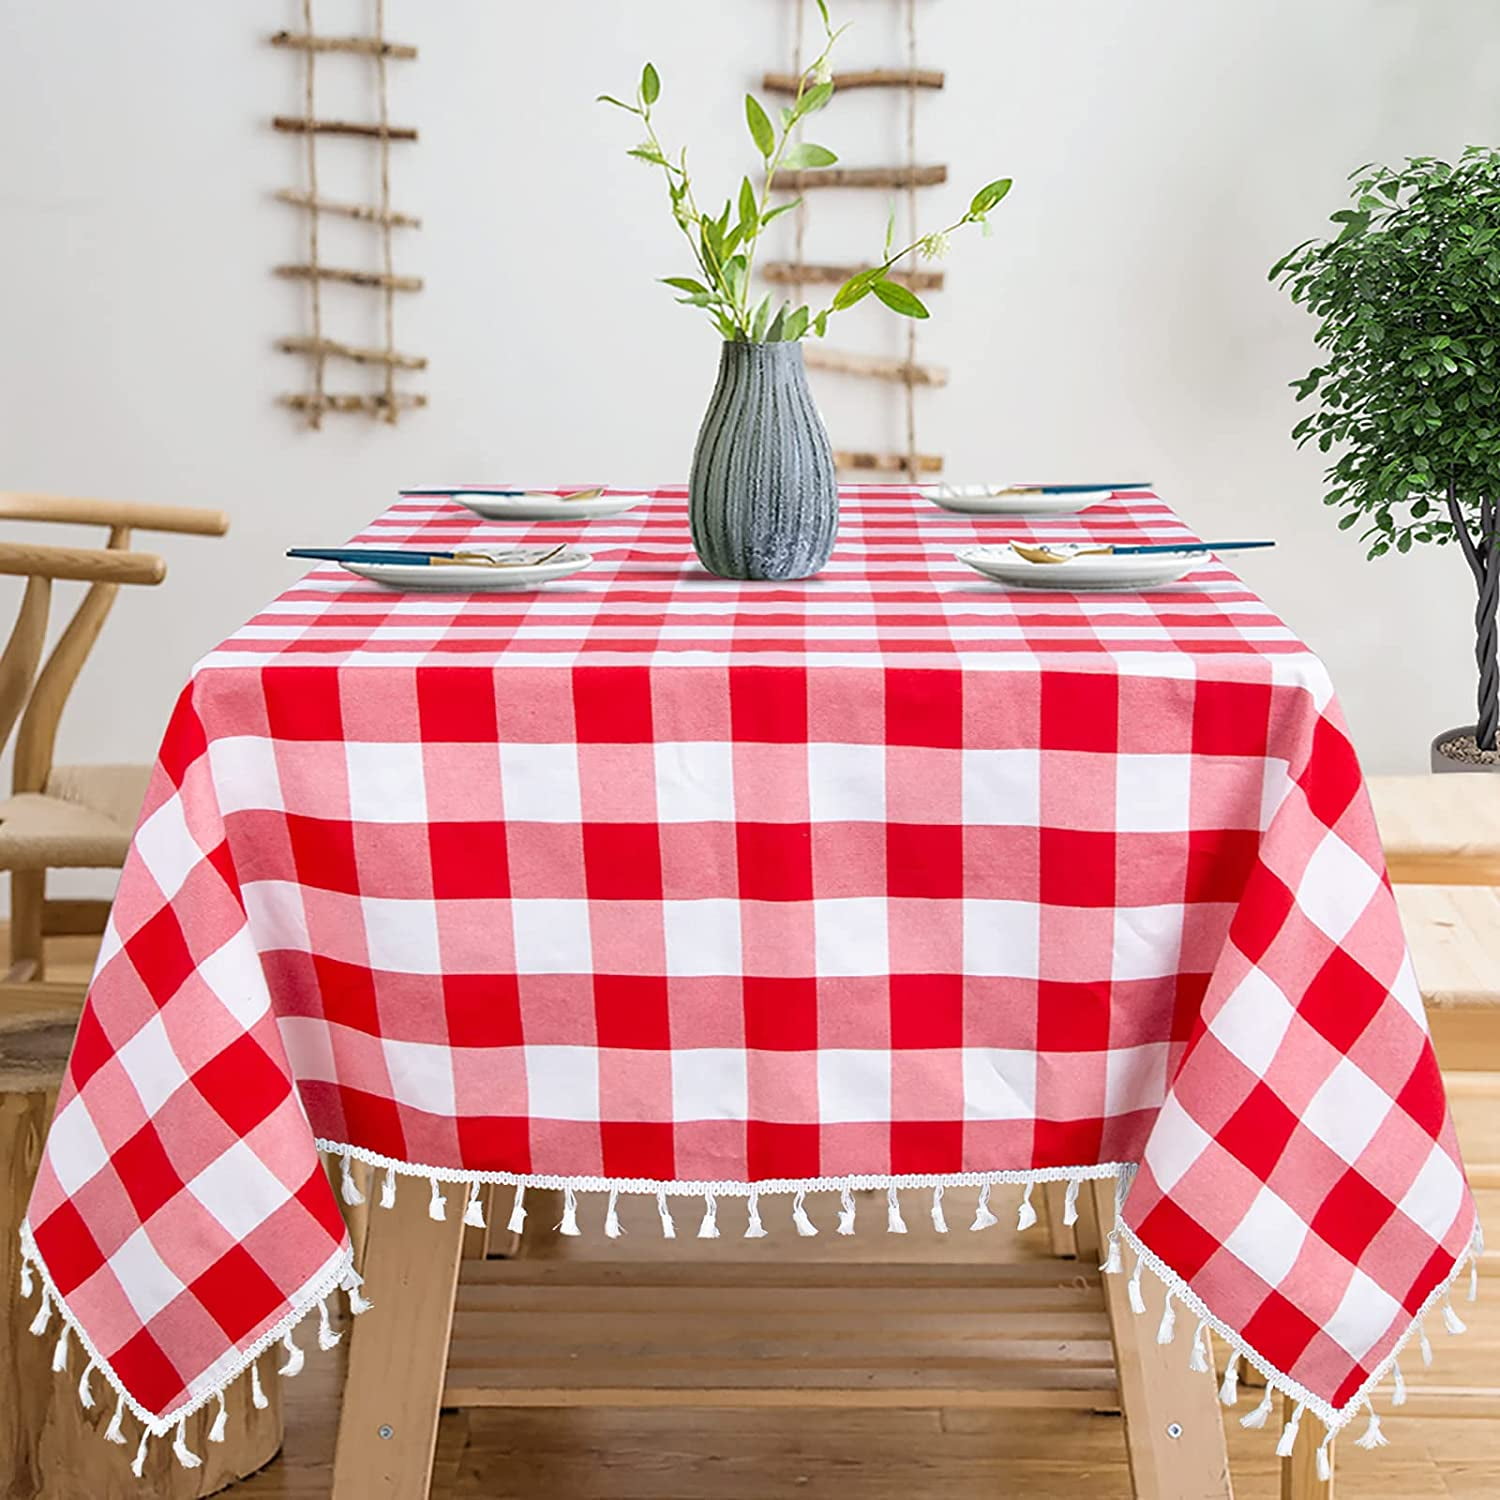 LOT OF 3 3 RED CHECK COUNTRY PLAID SQUARE GINGHAM TABLECLOTHS 54 X 54 